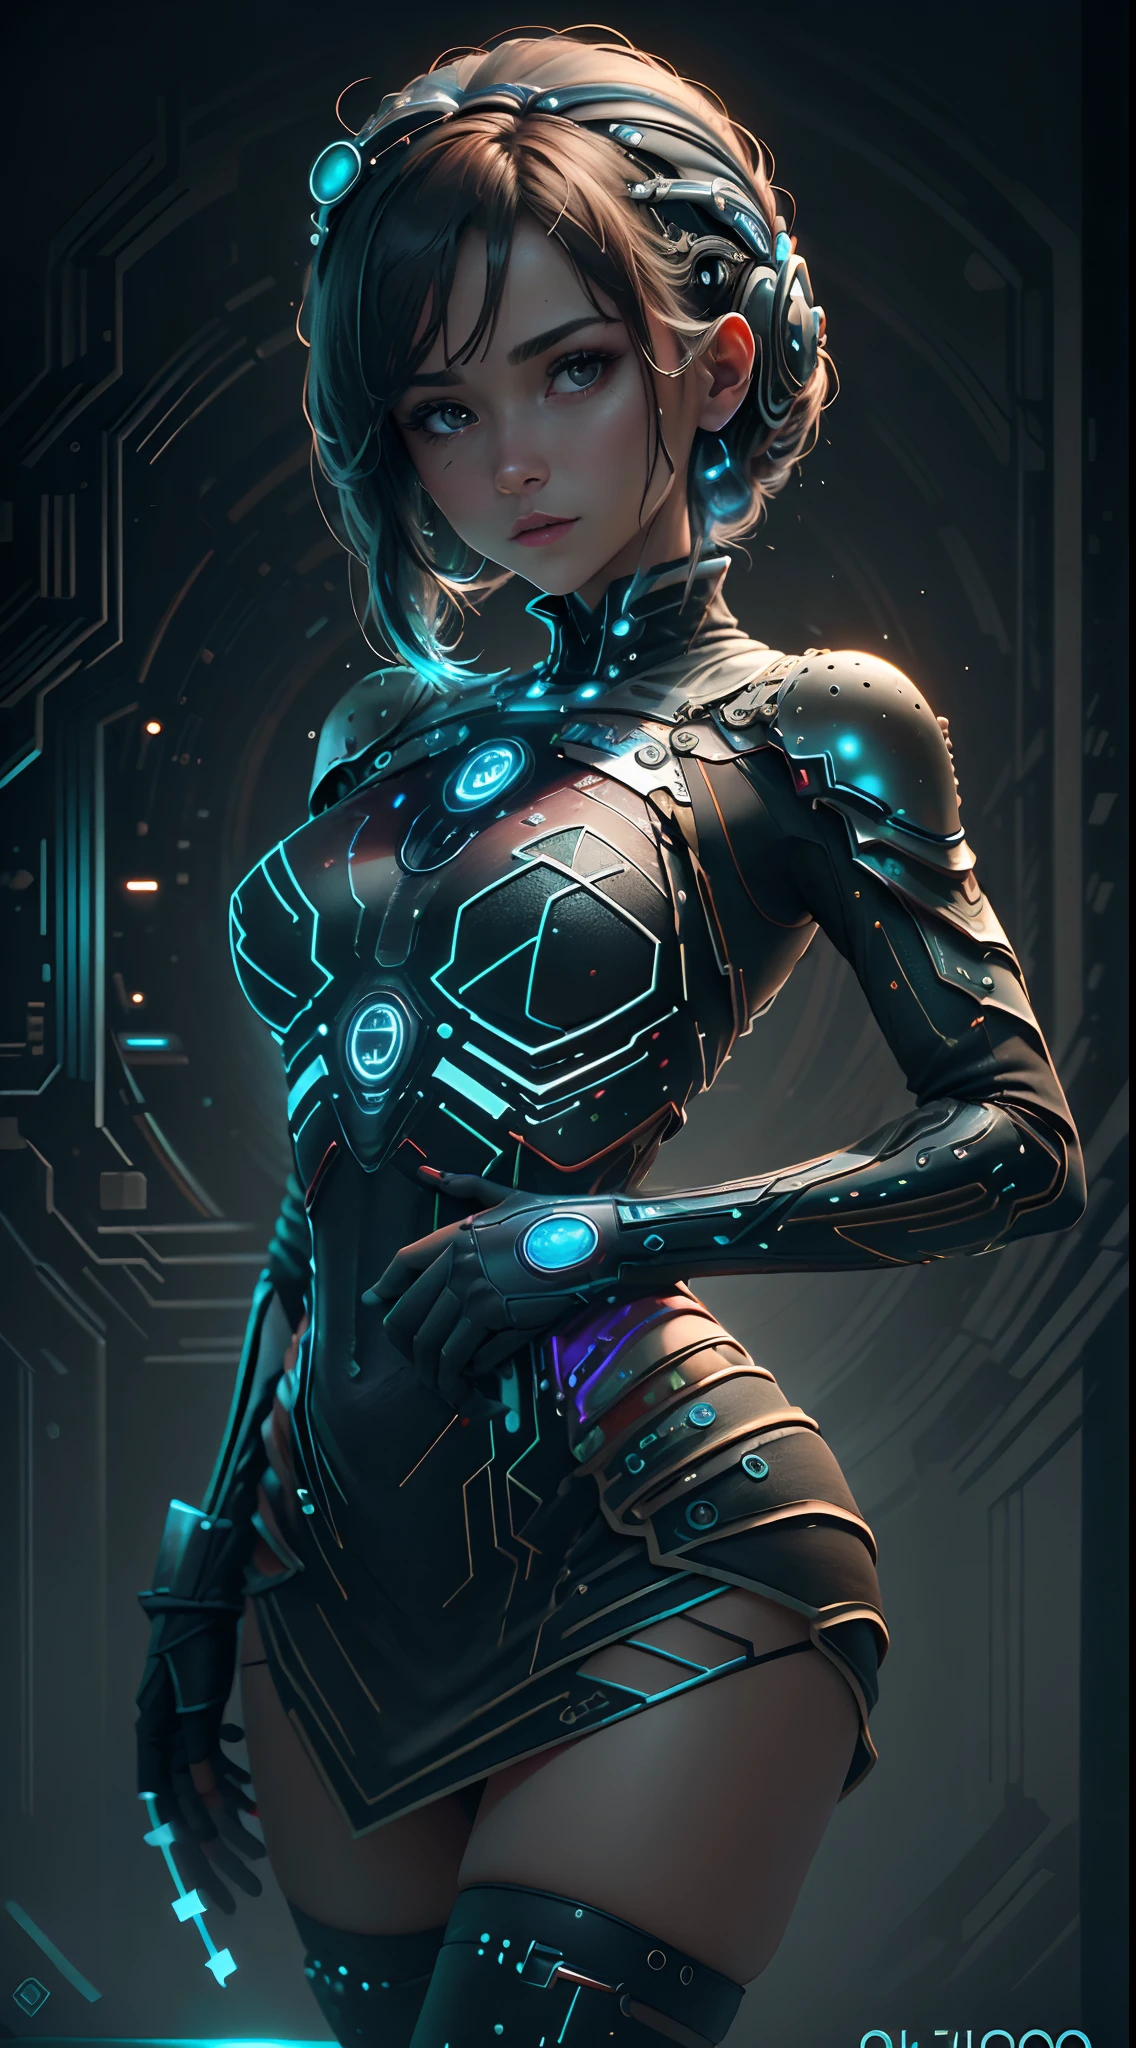 ((Best Quality)), ((Masterpiece)), (detailed: 1.4), ..3D, an image of a beautiful cyberpunk woman with thick voluminous hair, light particles, Pure energy, chaos, antitech, HDR (High Dymanic Range), ray tracing ,laboratory:1.4, NVIDIA RTX, Super-Resolution, Unreal 5, subsurface dispersion, Textured PBR, post-processing, Anisotropic filtering, depth of field, Maximum clarity and sharpness, Multilayer textures, Albedo and specular maps, surface shading, Accurate simulation of light-material interaction,perfect proportions,Octane representation,two tone lighting,wide opening,Low ISO,white balance,rule of thirds,RAW 8K, unreal engine:1.4,UHD,La Best Quality:1.4, photorealistic:1.4, skin texture:1.4, Masterpiece:1.8,